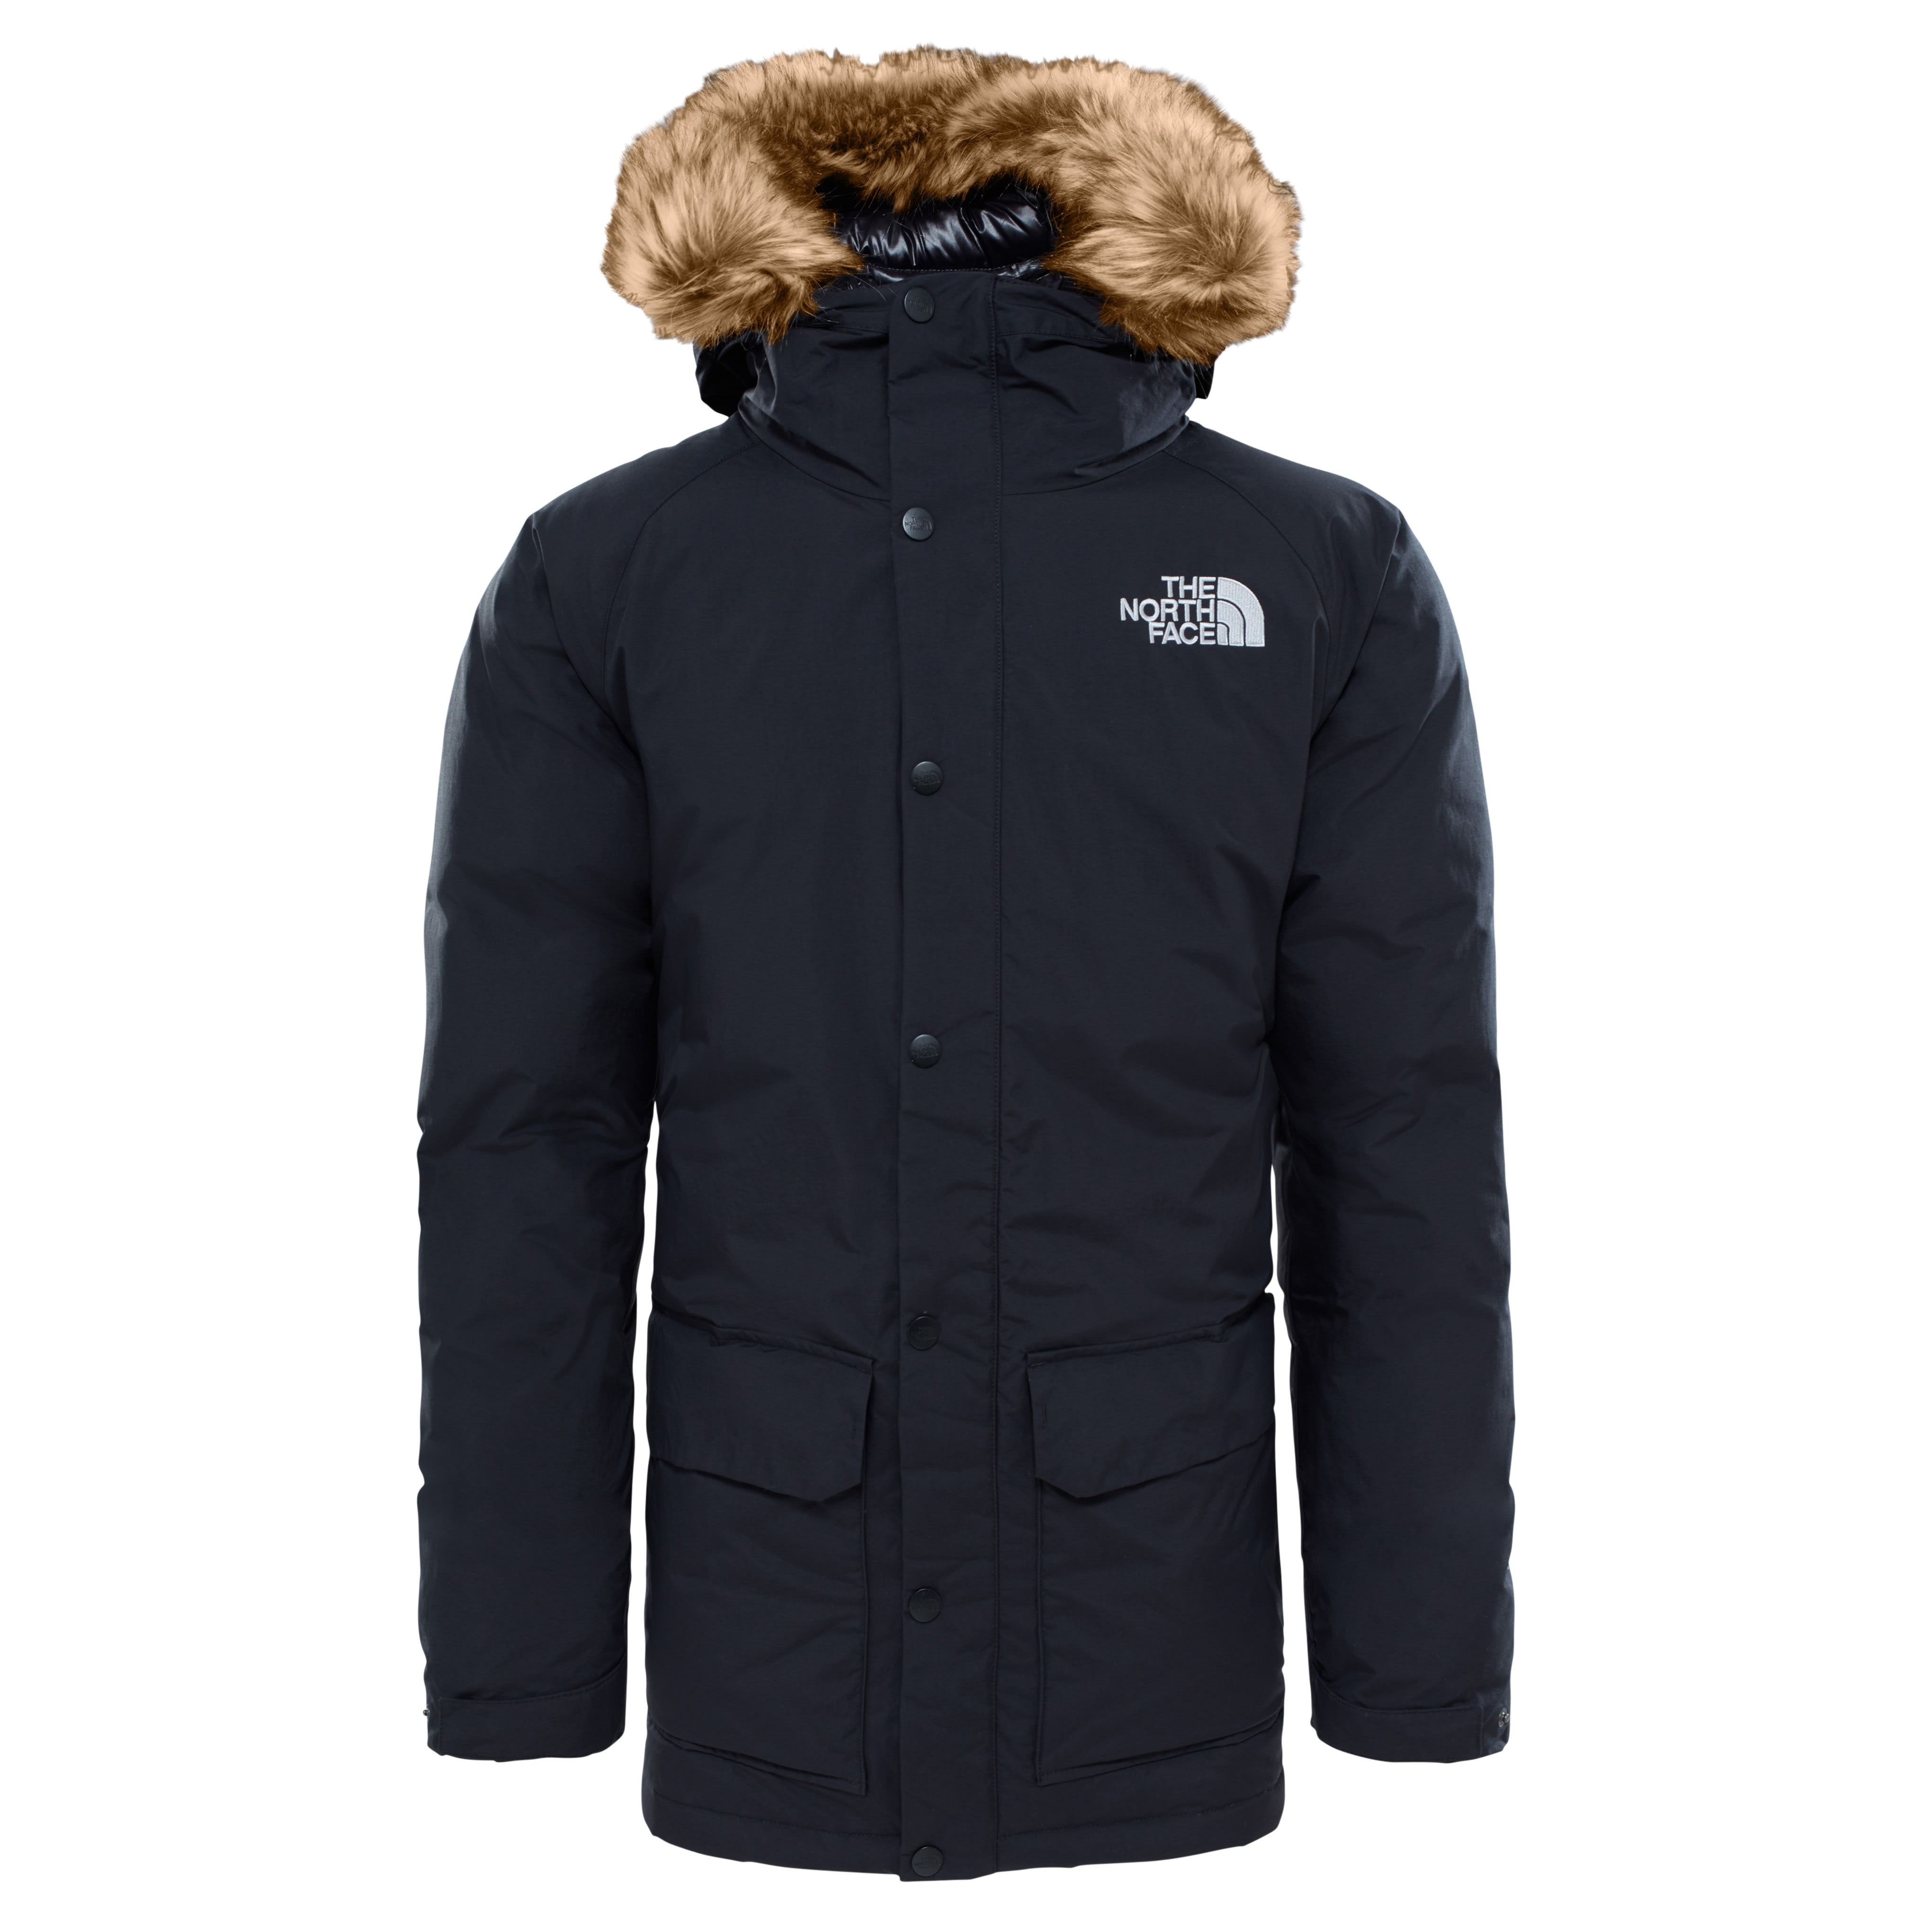 Buy The North Face M Serow Jacket from 